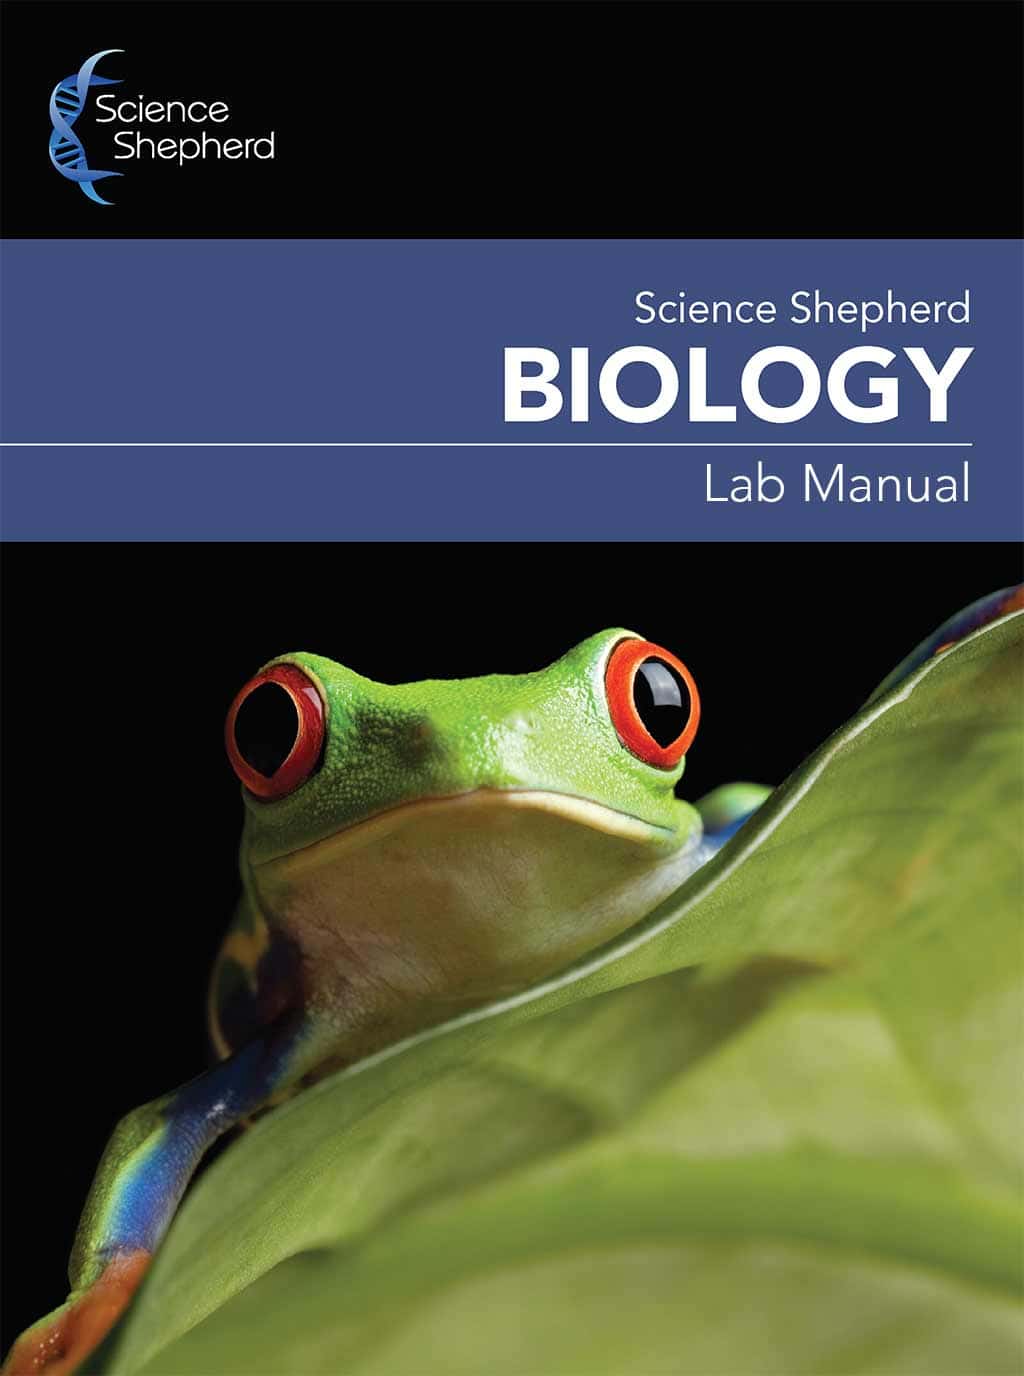 Science Shepherd Homeschool Biology Lab Manual cover of a green tree frog on a leaf